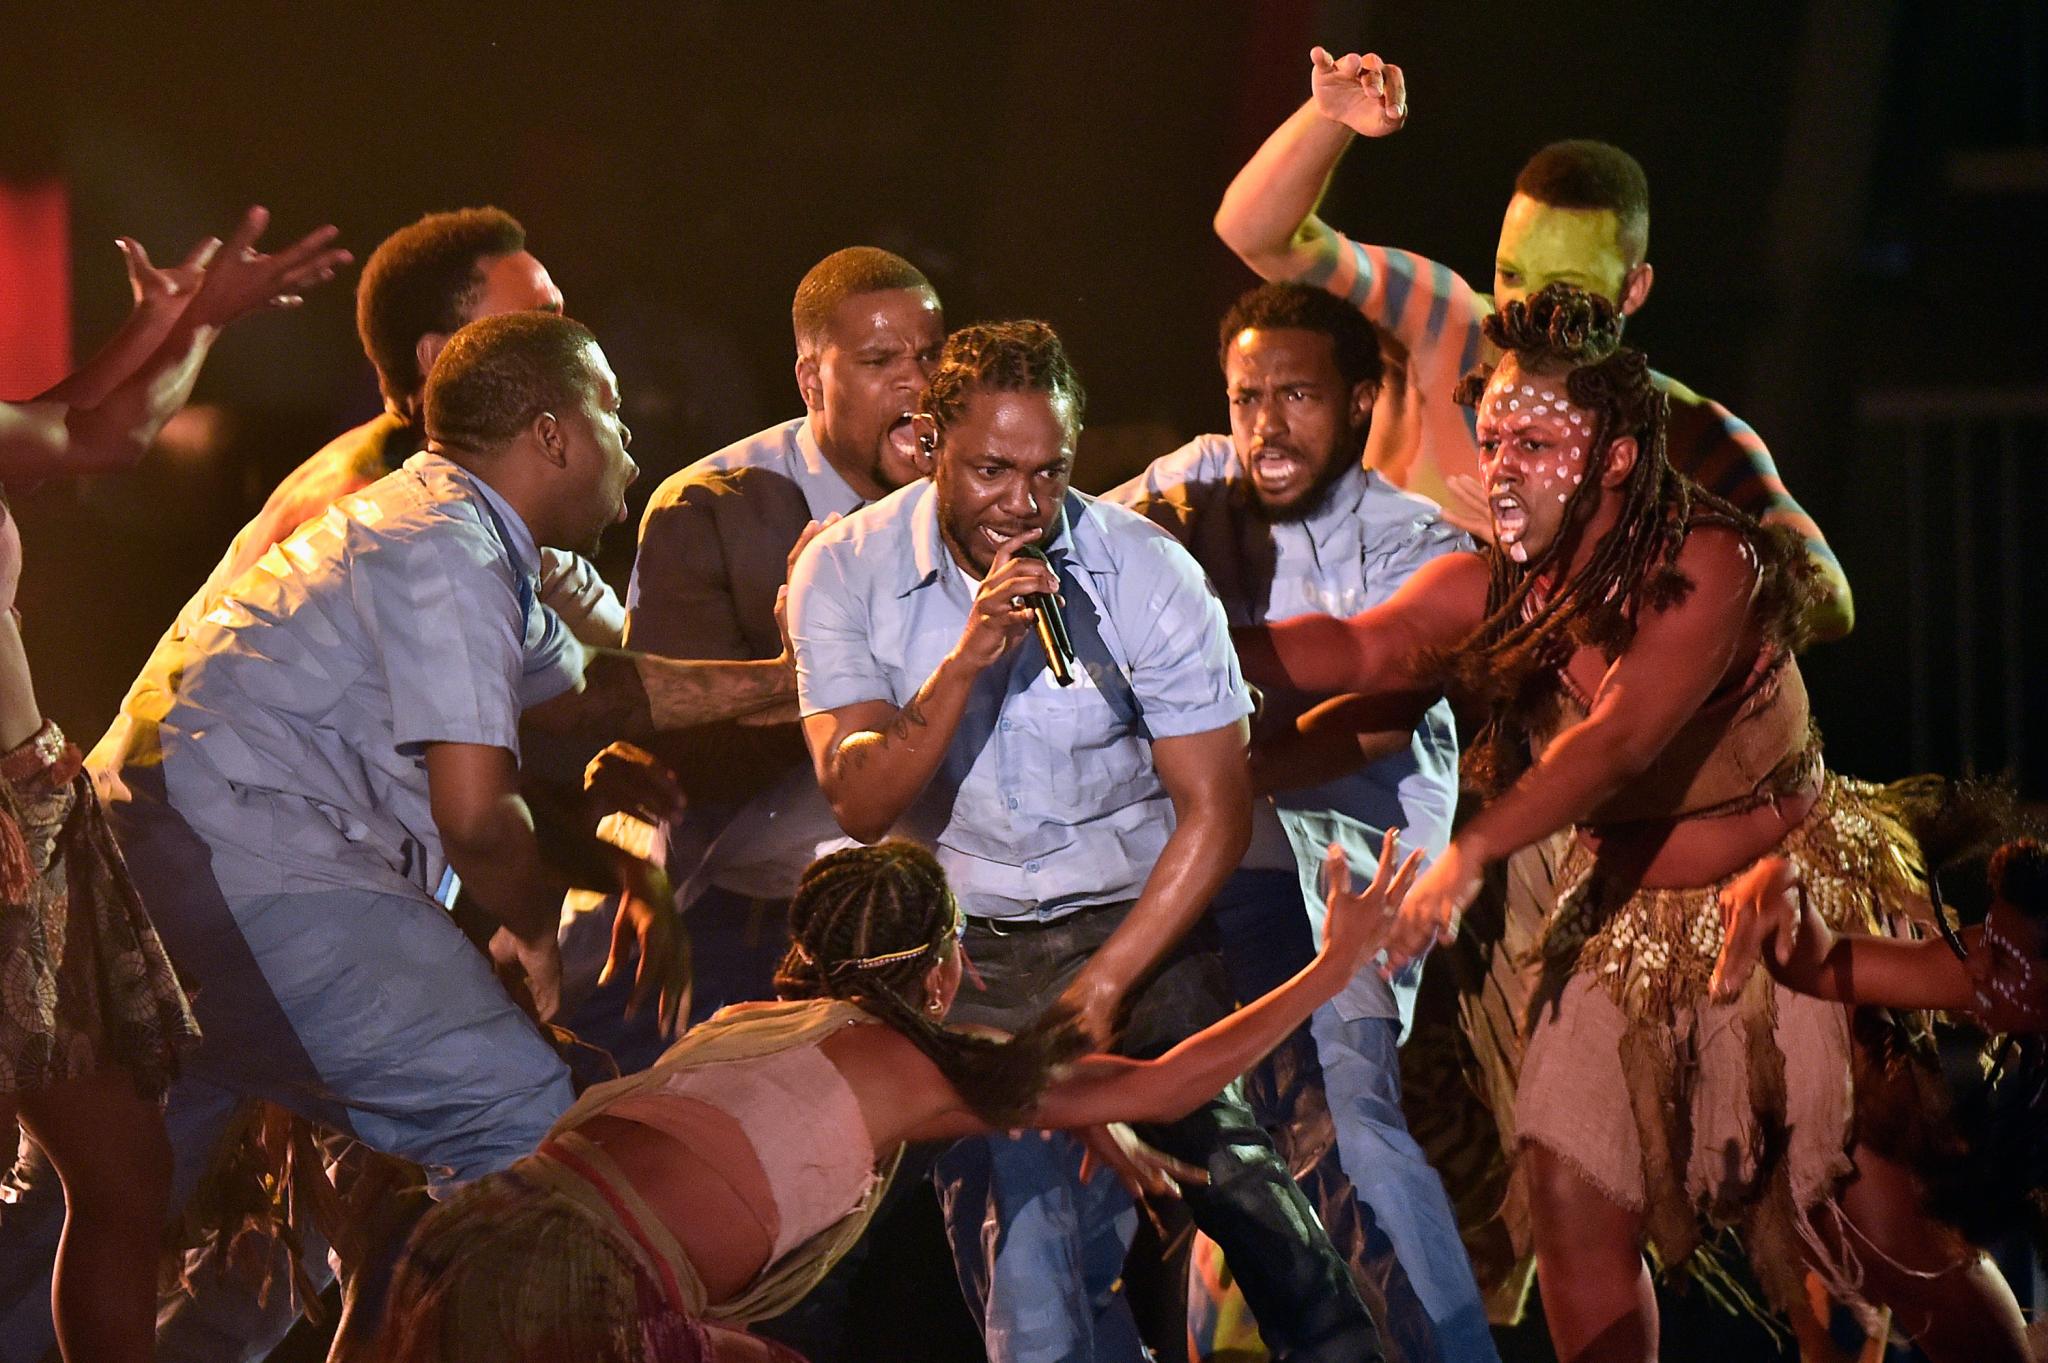 The Best Twitter Reactions to Kendrick Lamar’s Grammy Performance